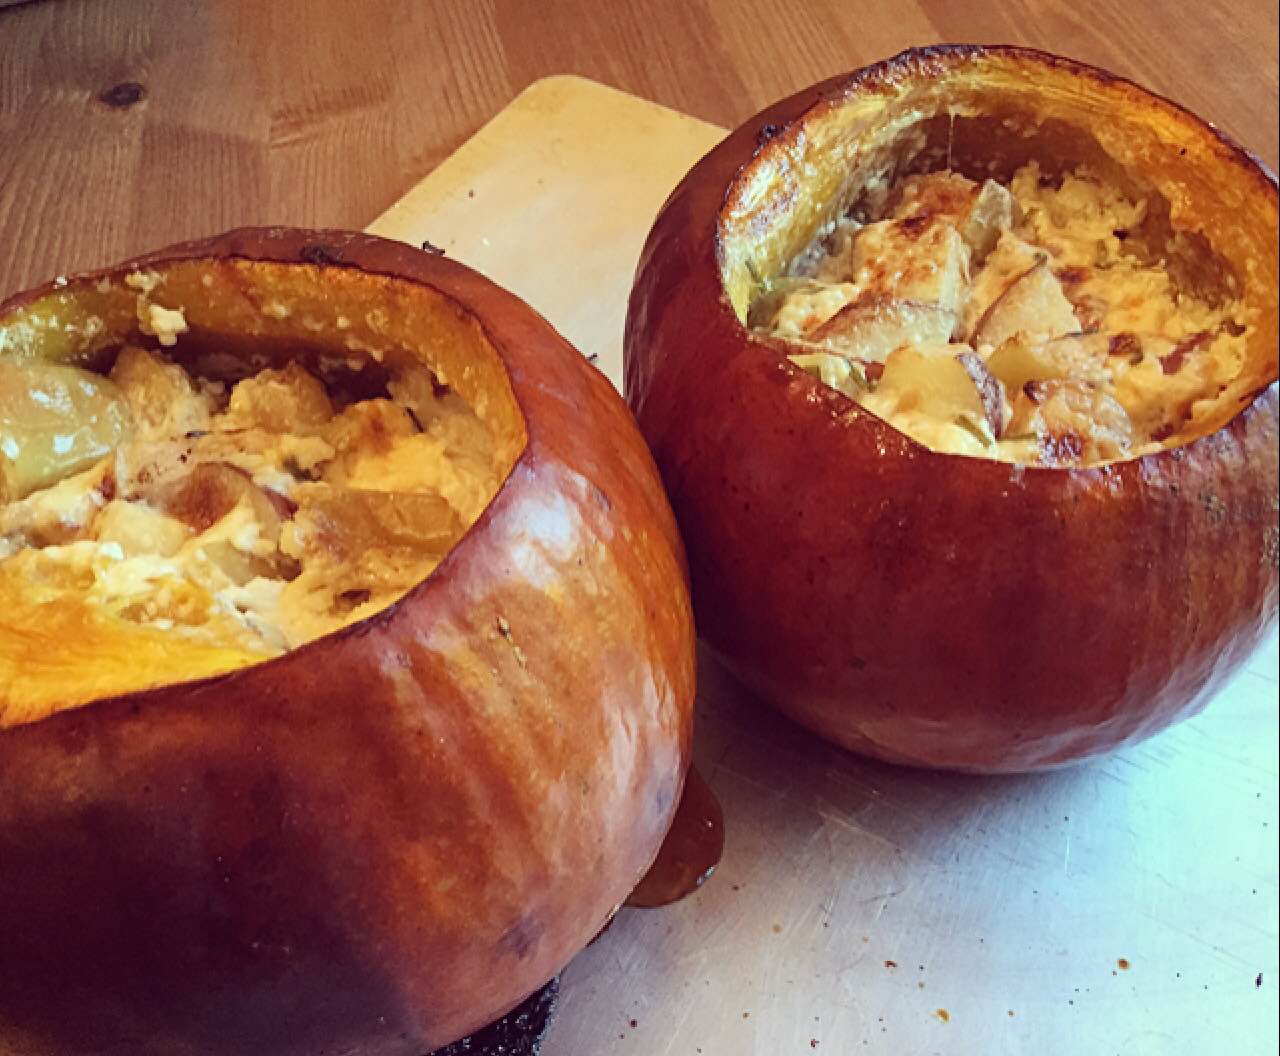 Looking for a way to use your fall pumpkins? Try this healthy and gooey stuffed pumpkin recipe with delcious pancetta, apple, potatoes and cheese.